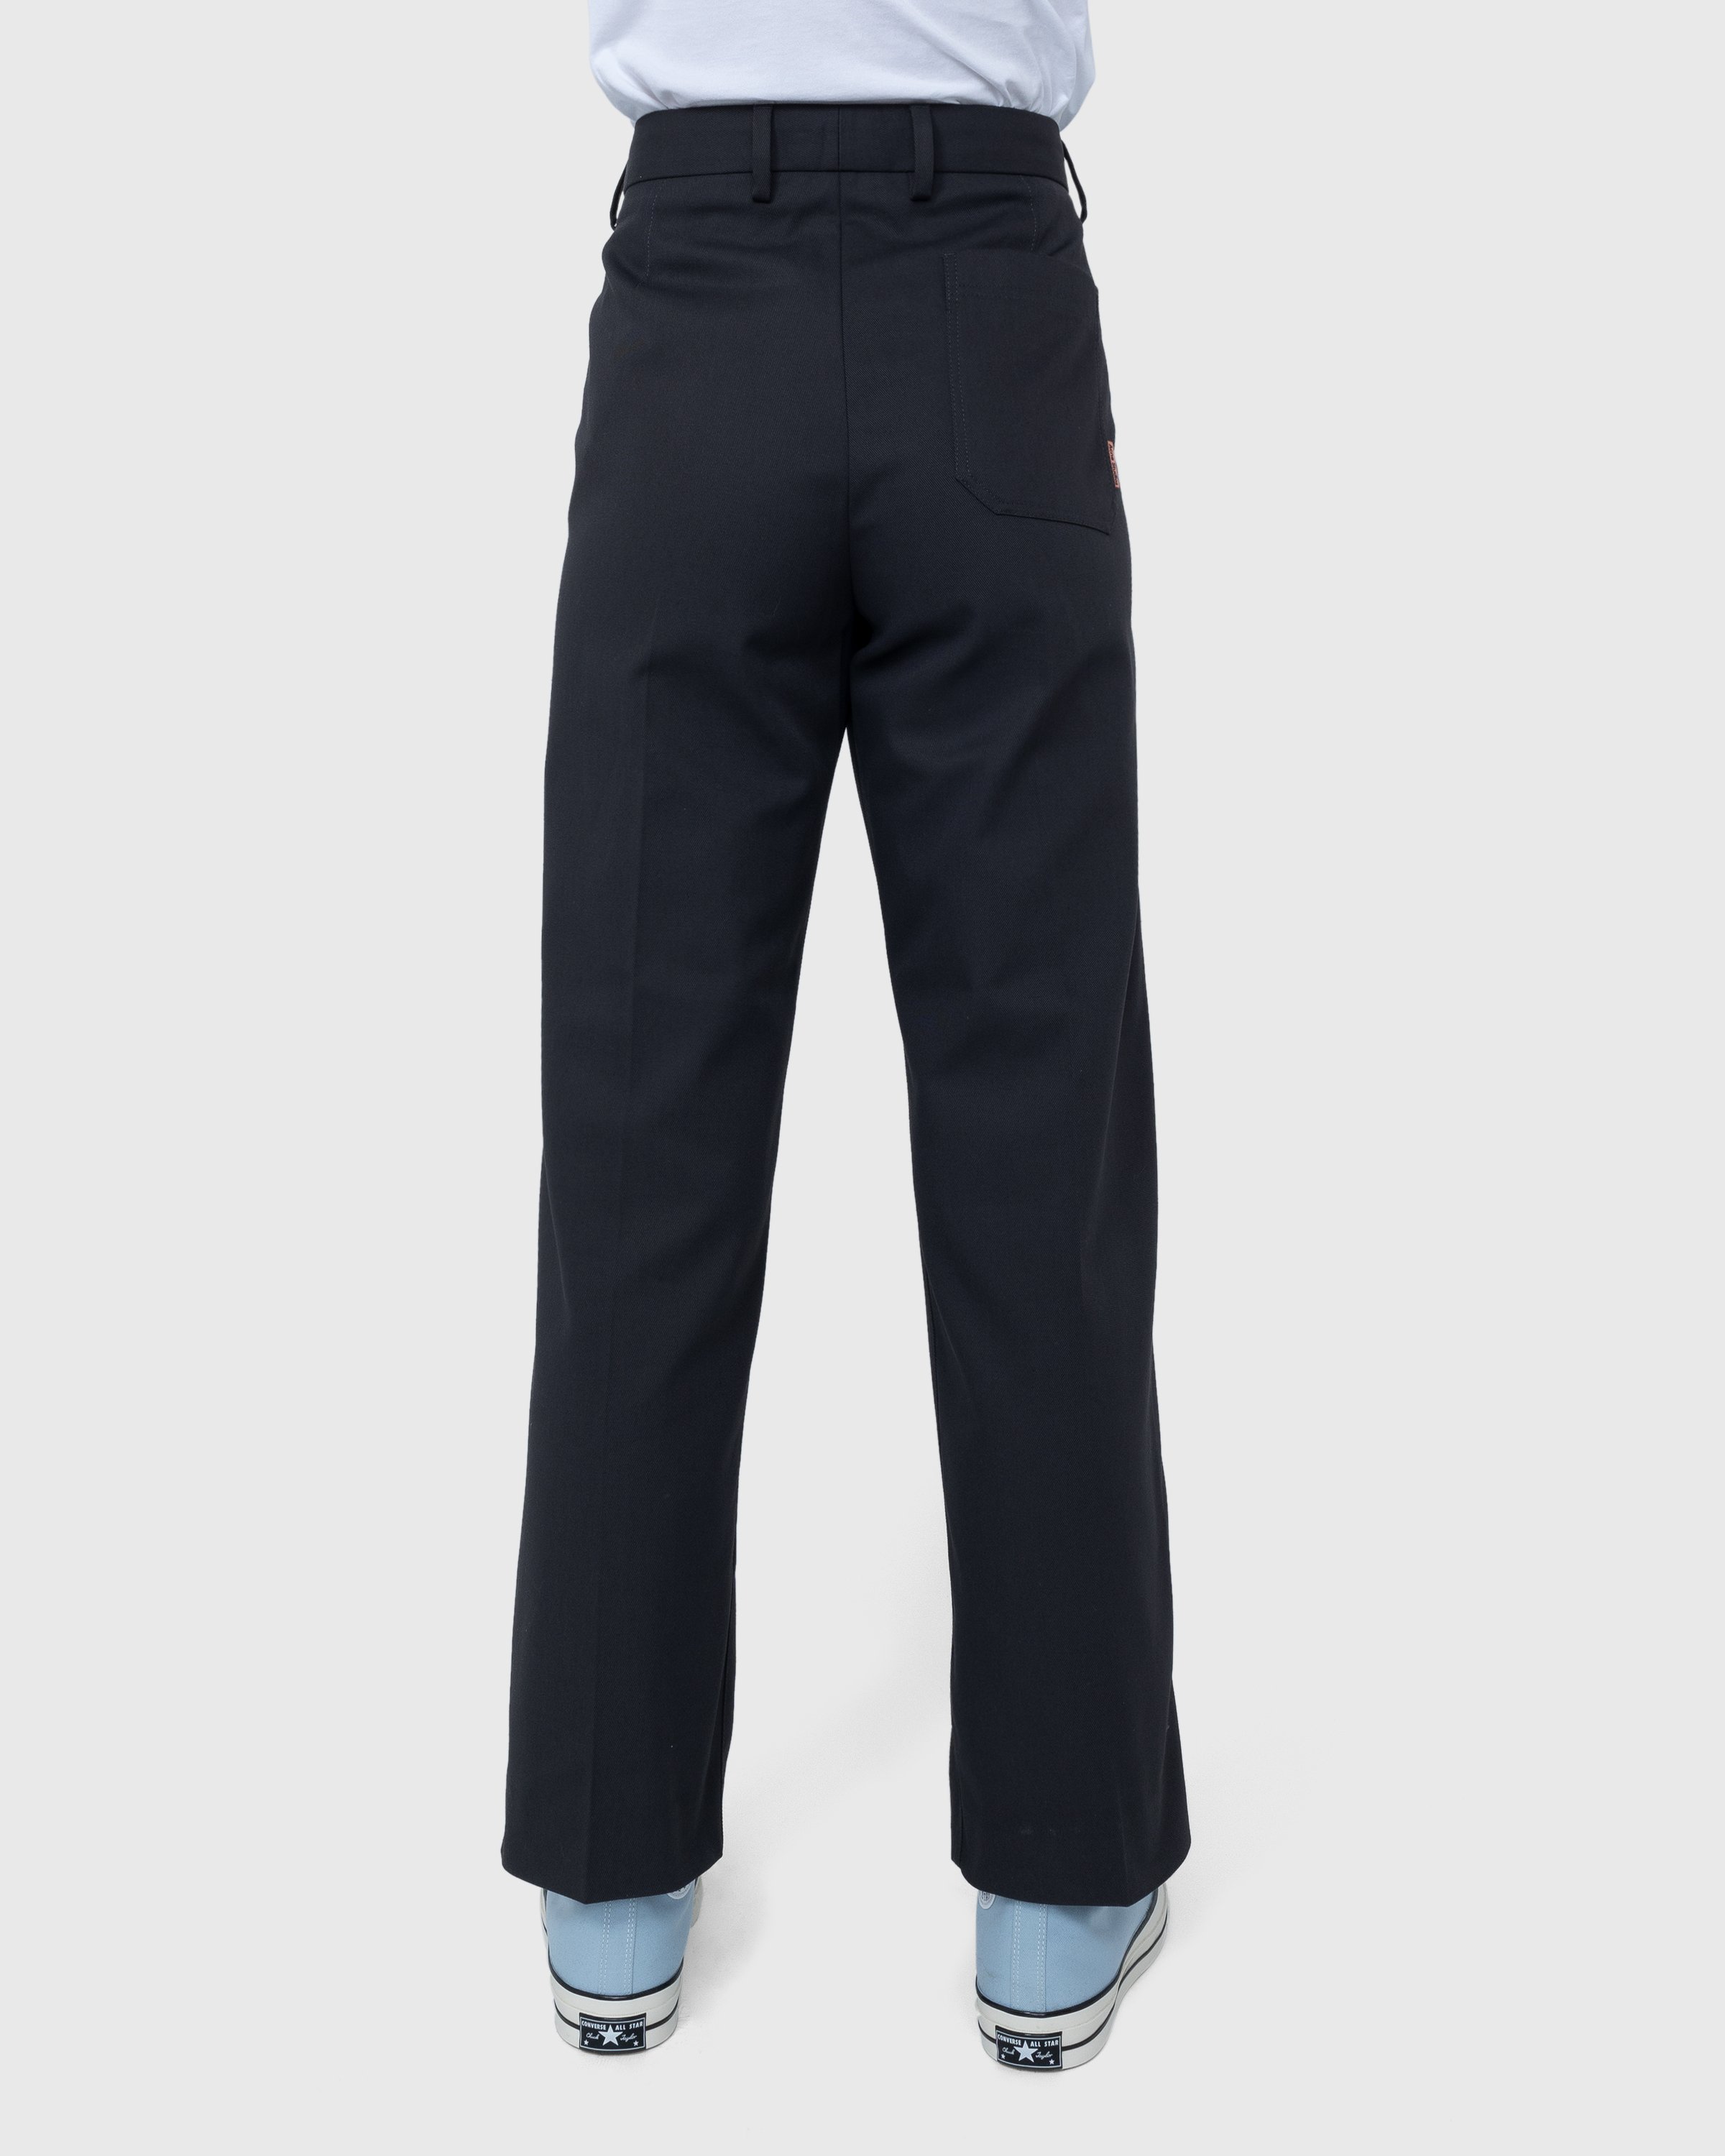 Acne Studios - Casual Trousers Anthracite Grey - Clothing - Grey - Image 4